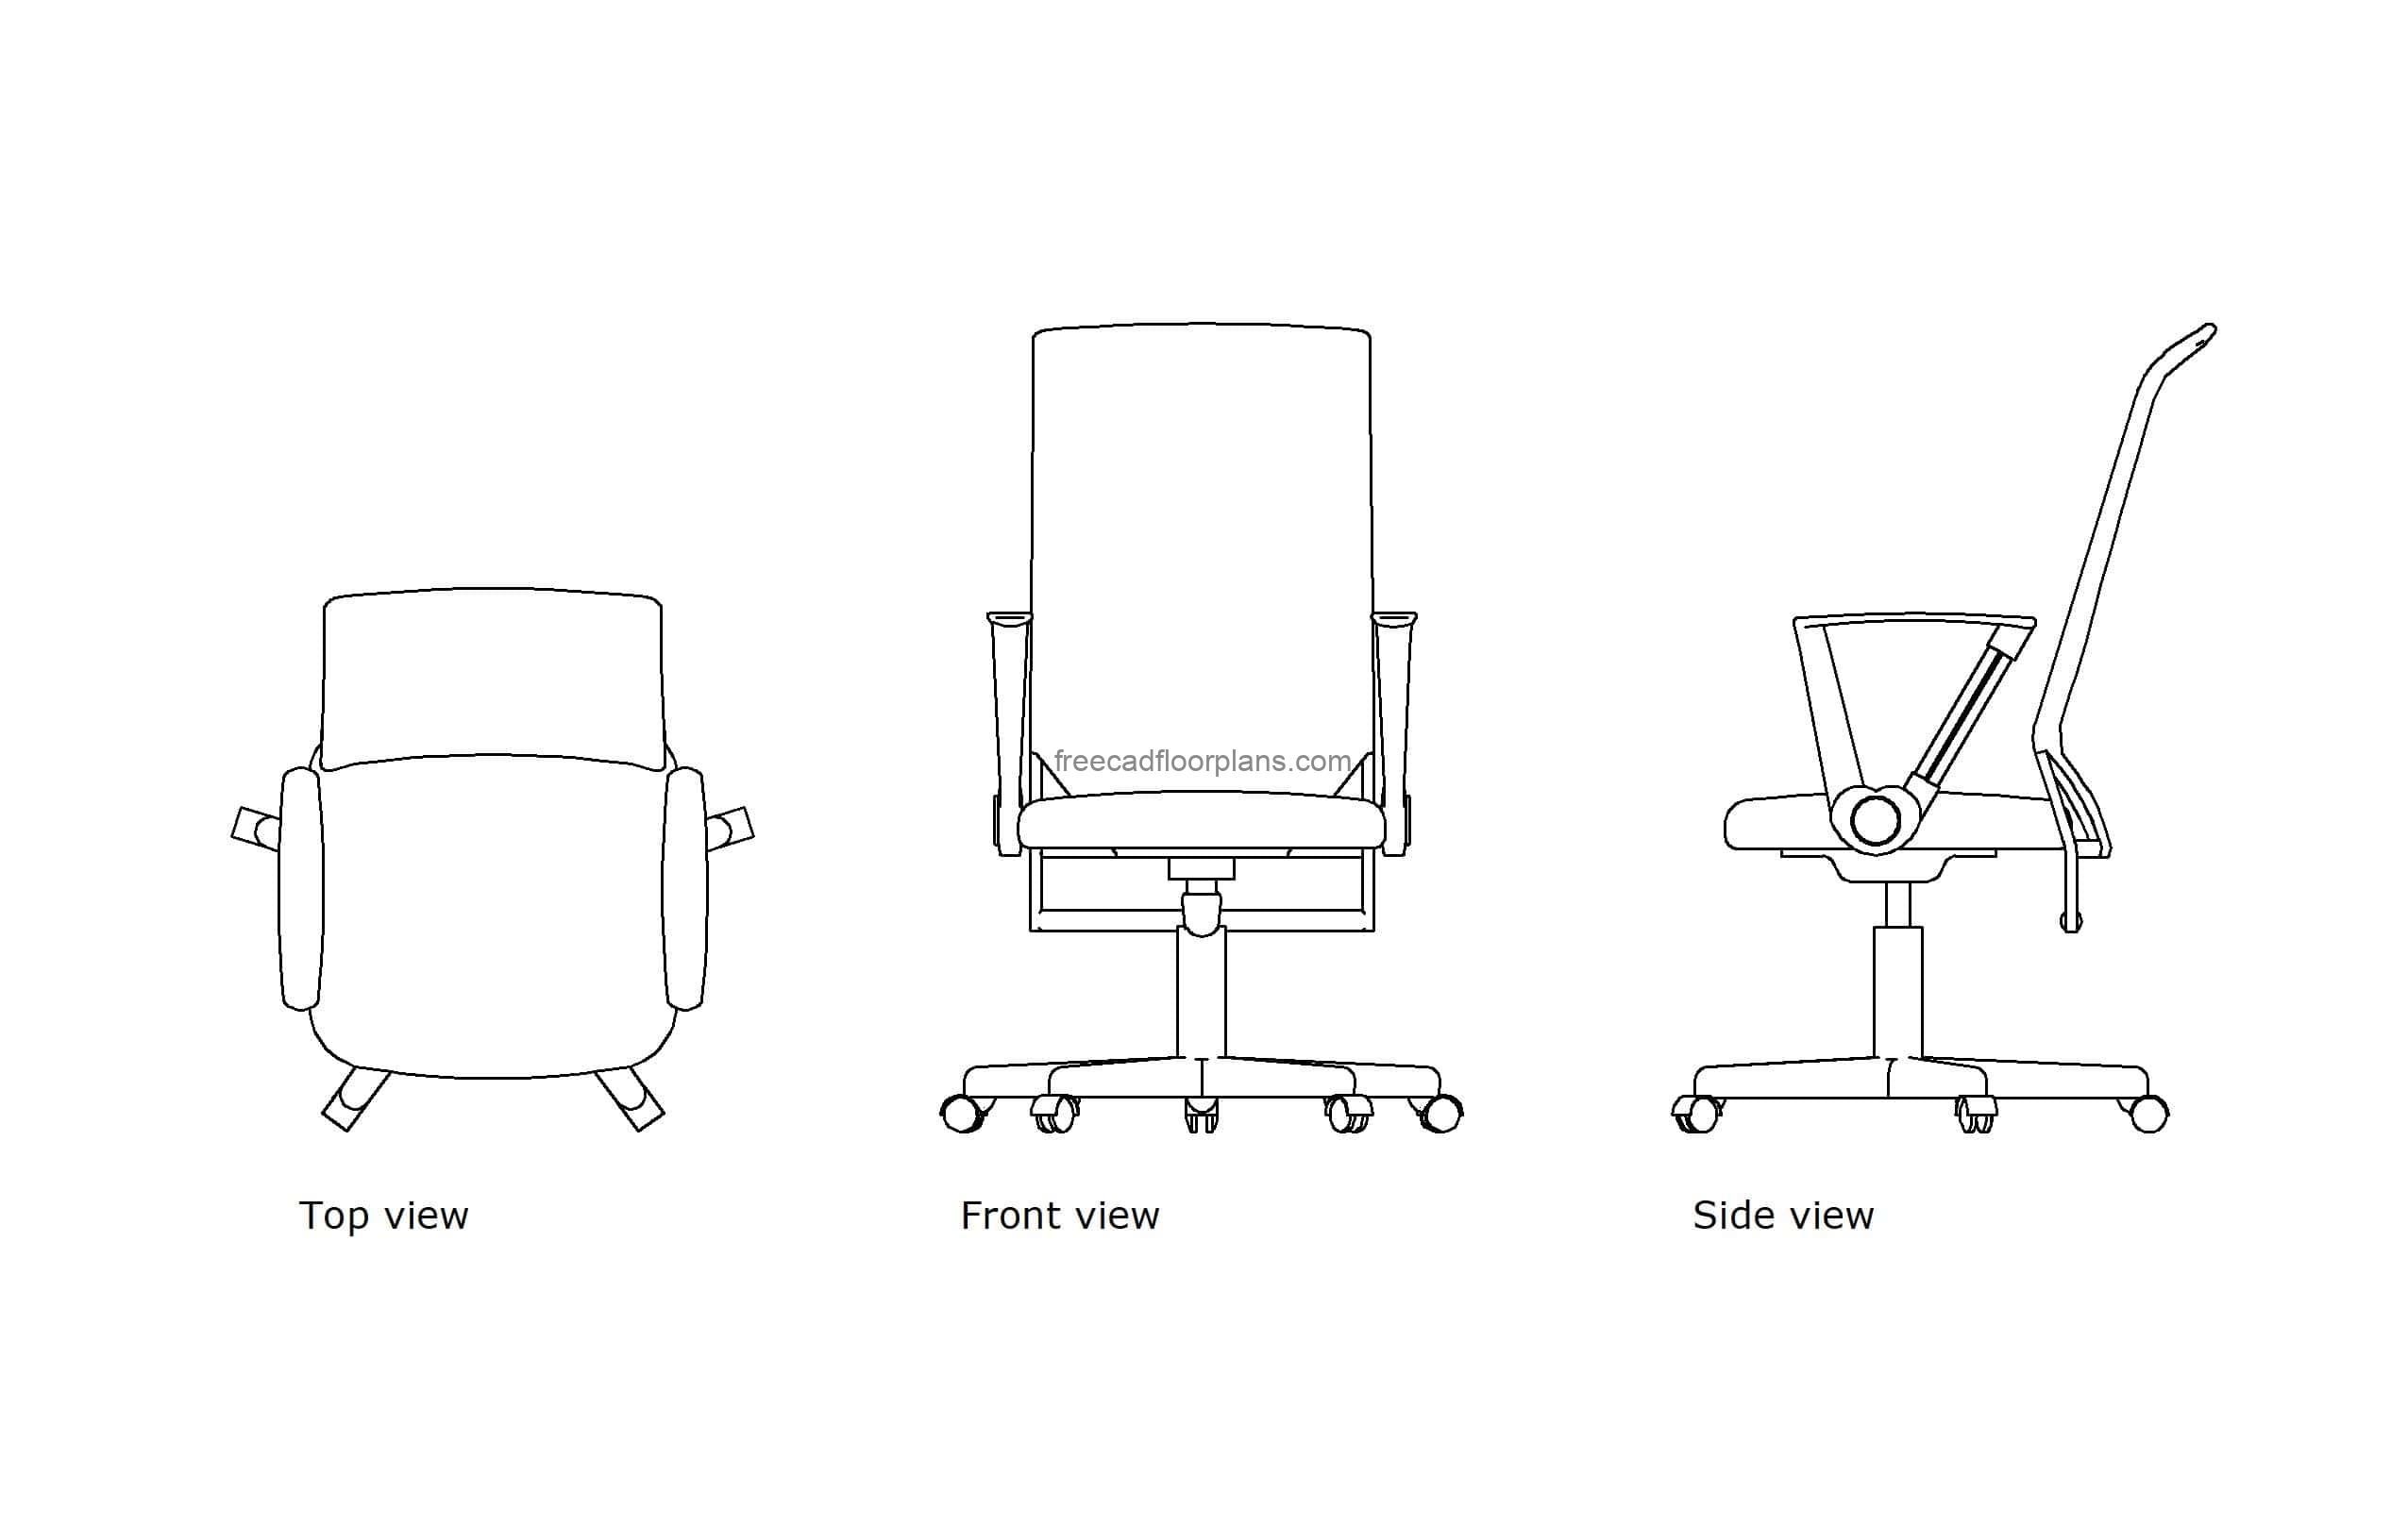 autocad drawing of a highback executive chair, plan and elevation 2d views, dwg file free for download